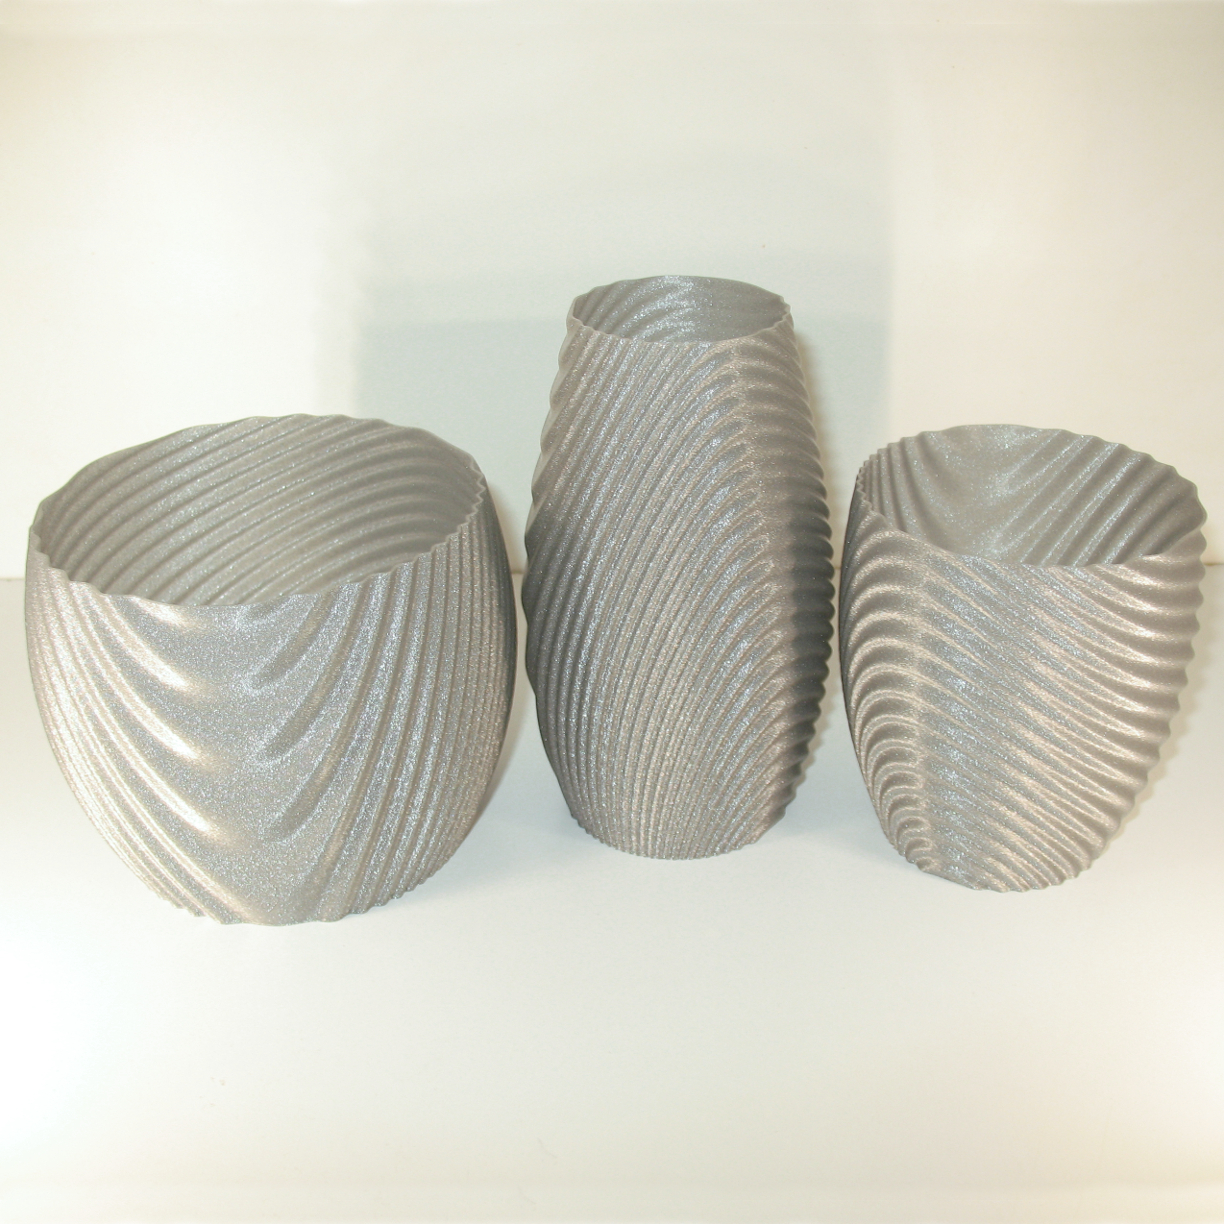 Wavy organic bowl, cups, vase and flower pot. image